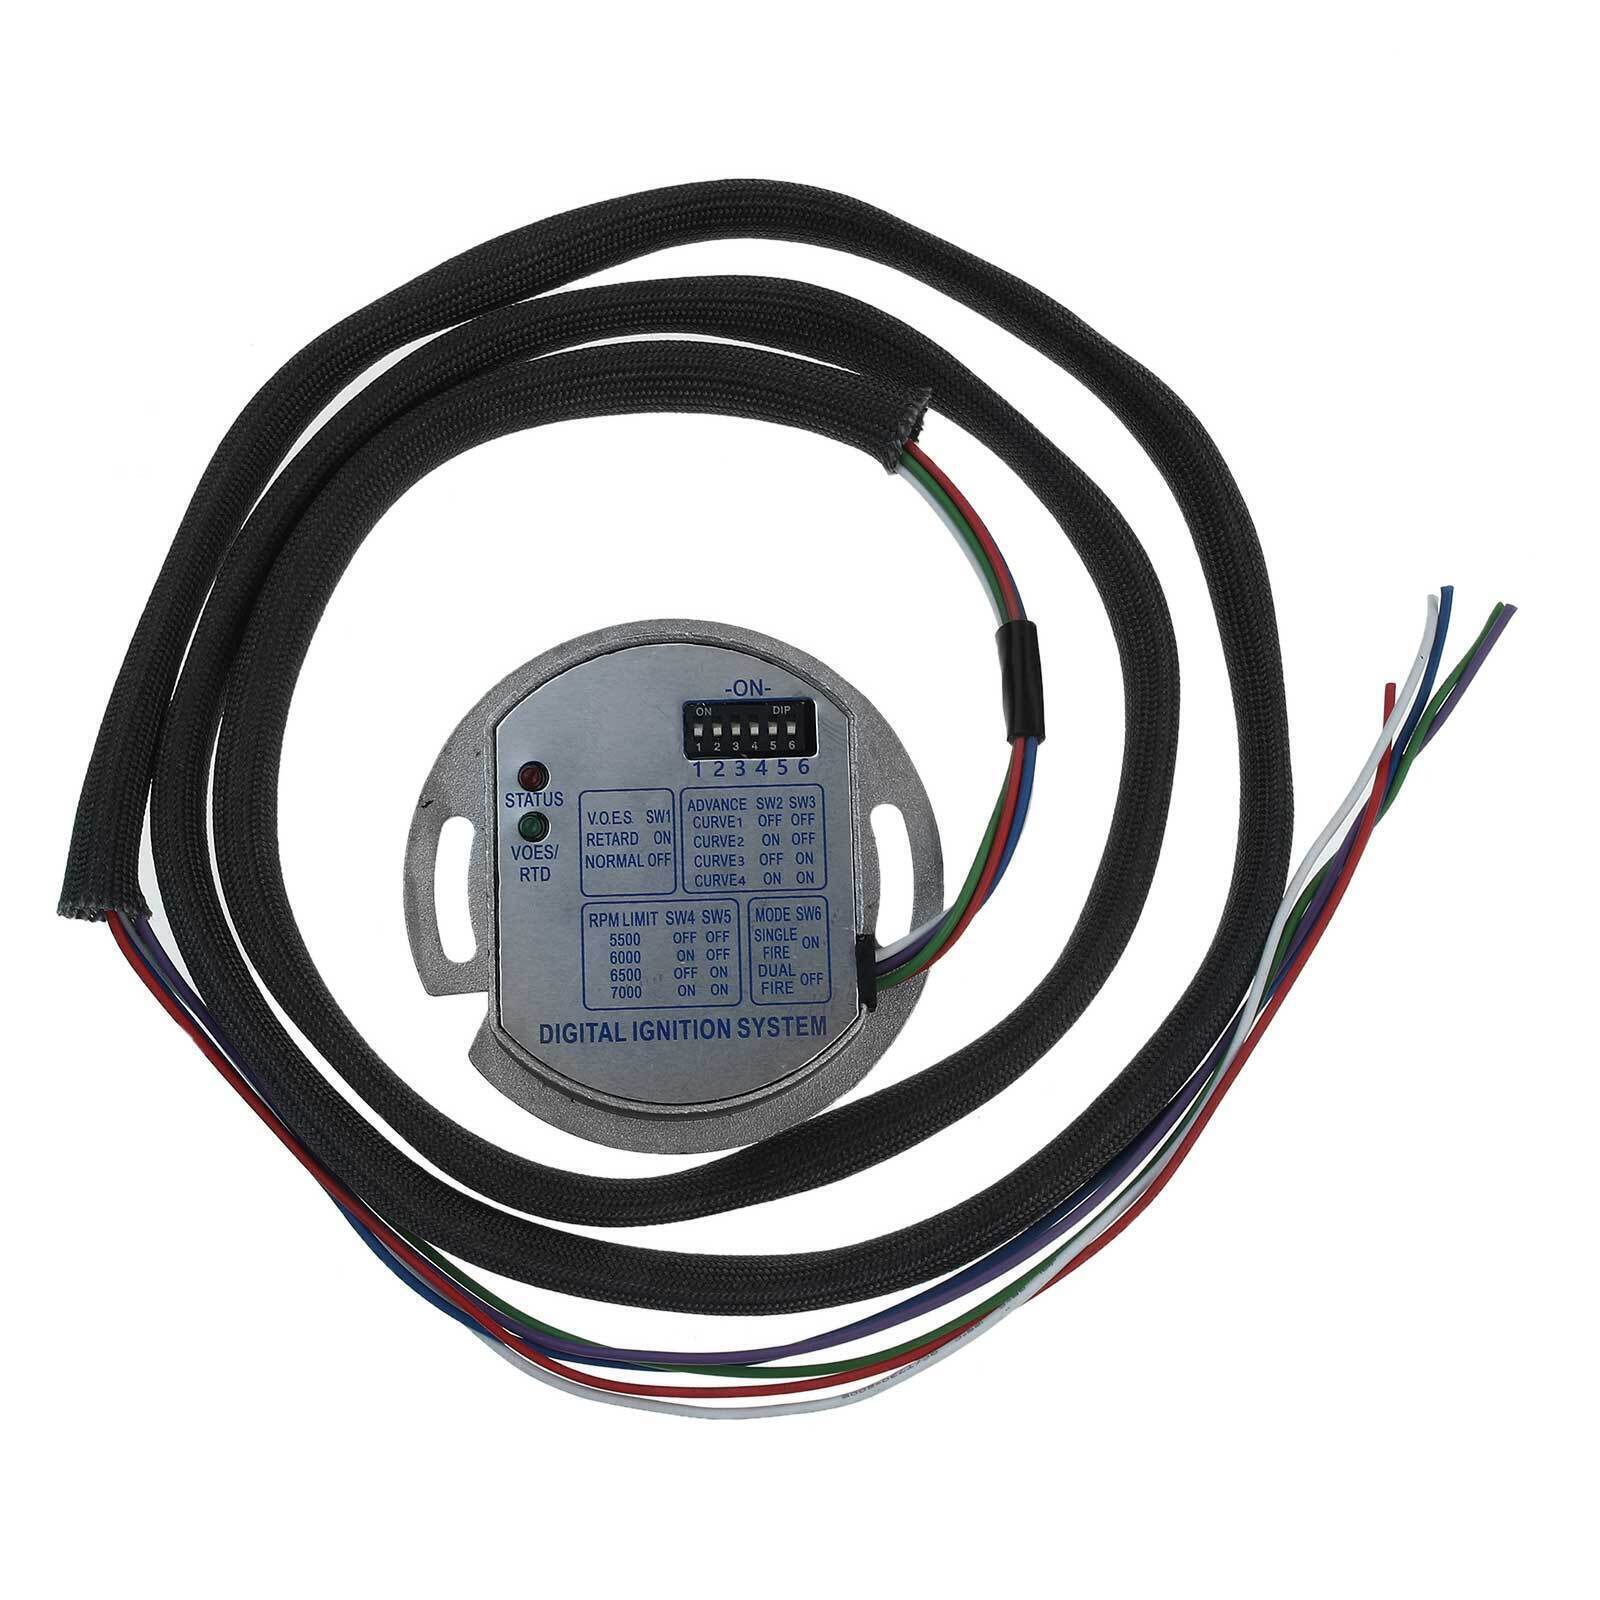 Single Fire Programmable Electronic Digital Ignition Module 53-644 For Big Twin